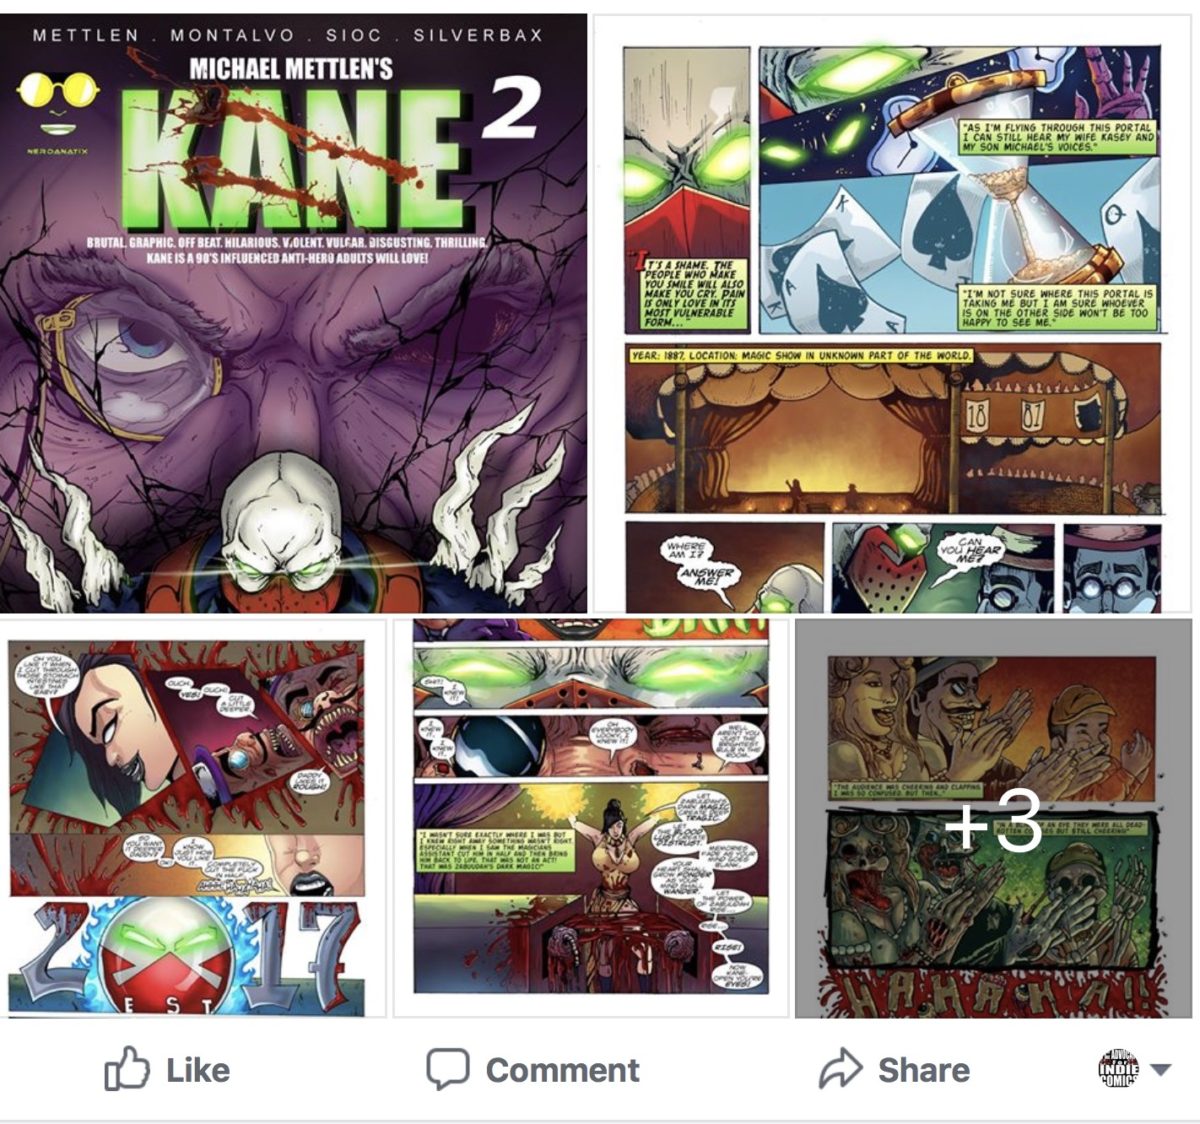 If you haven’t gotten KANE 2 yet it is available for you to order and have your physical copy.